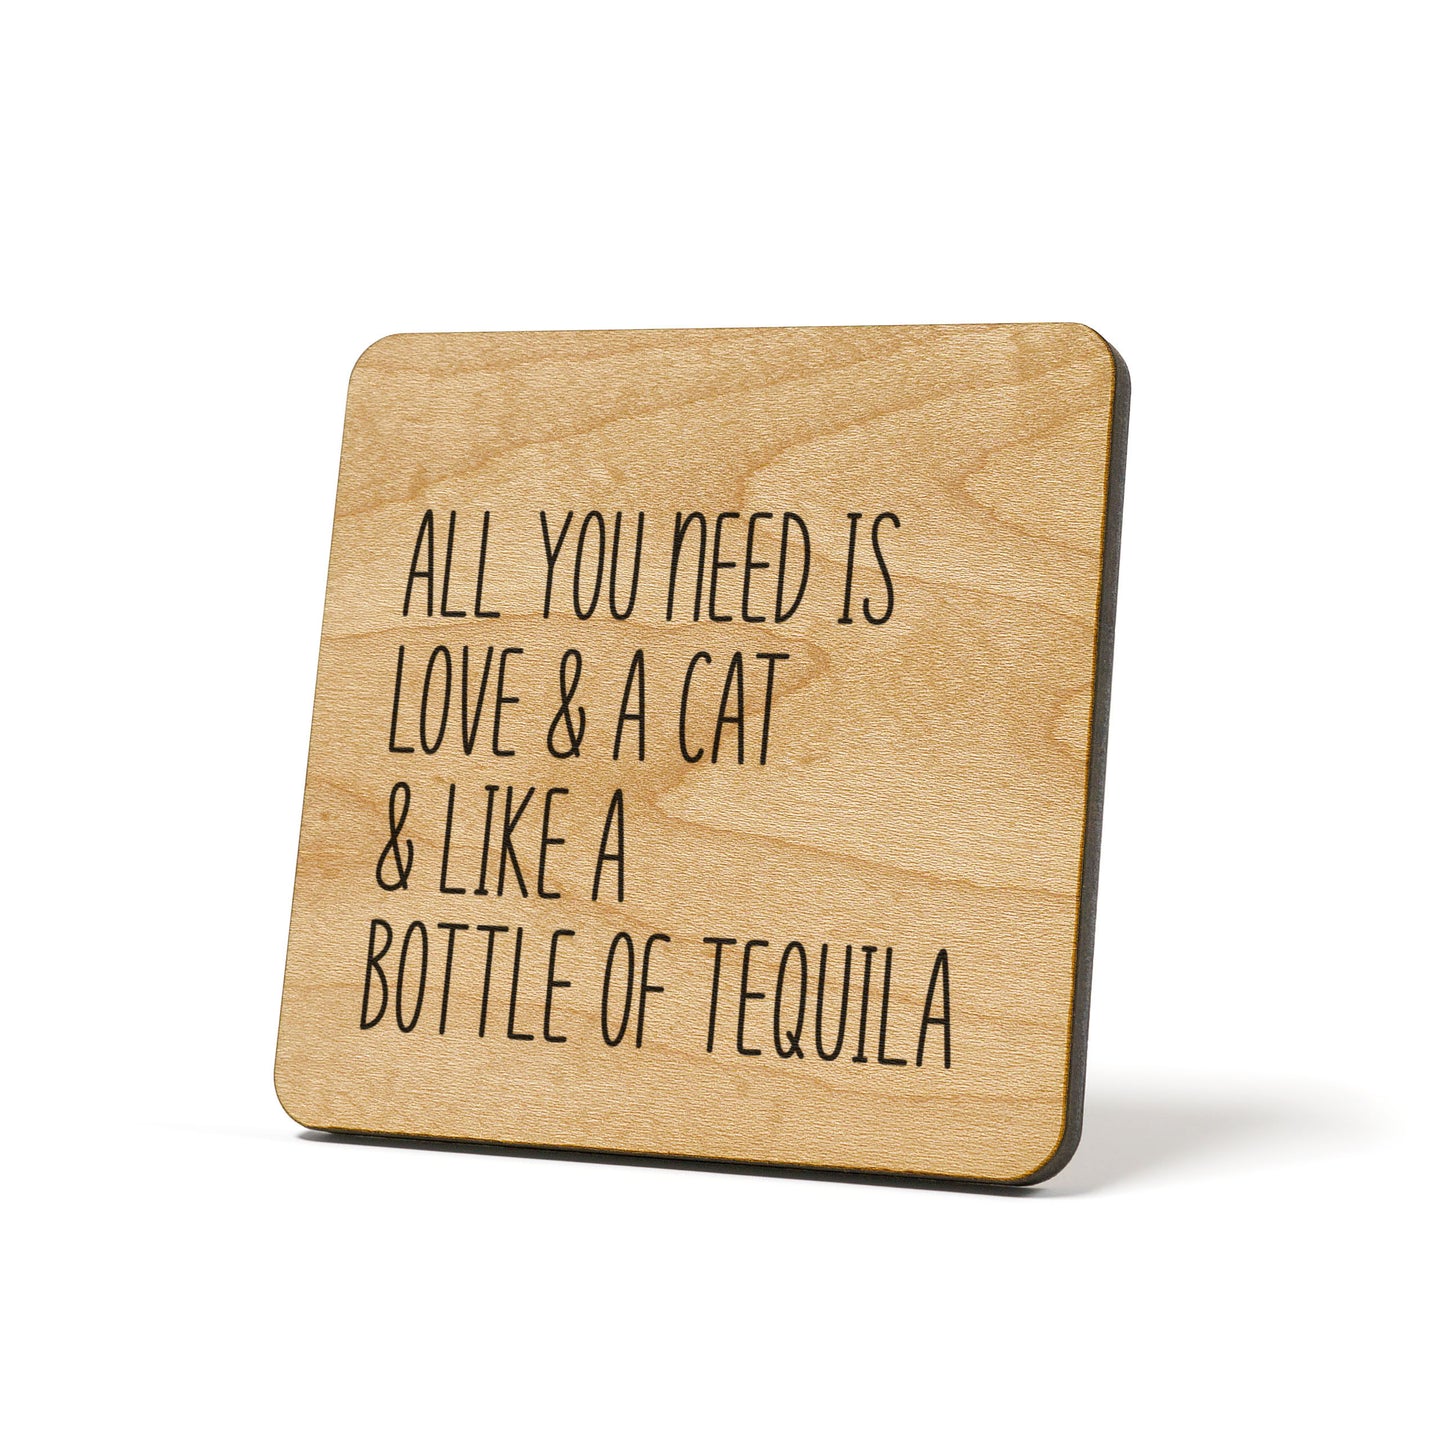 All you need is love & a cat & Tequila Quote Coaster